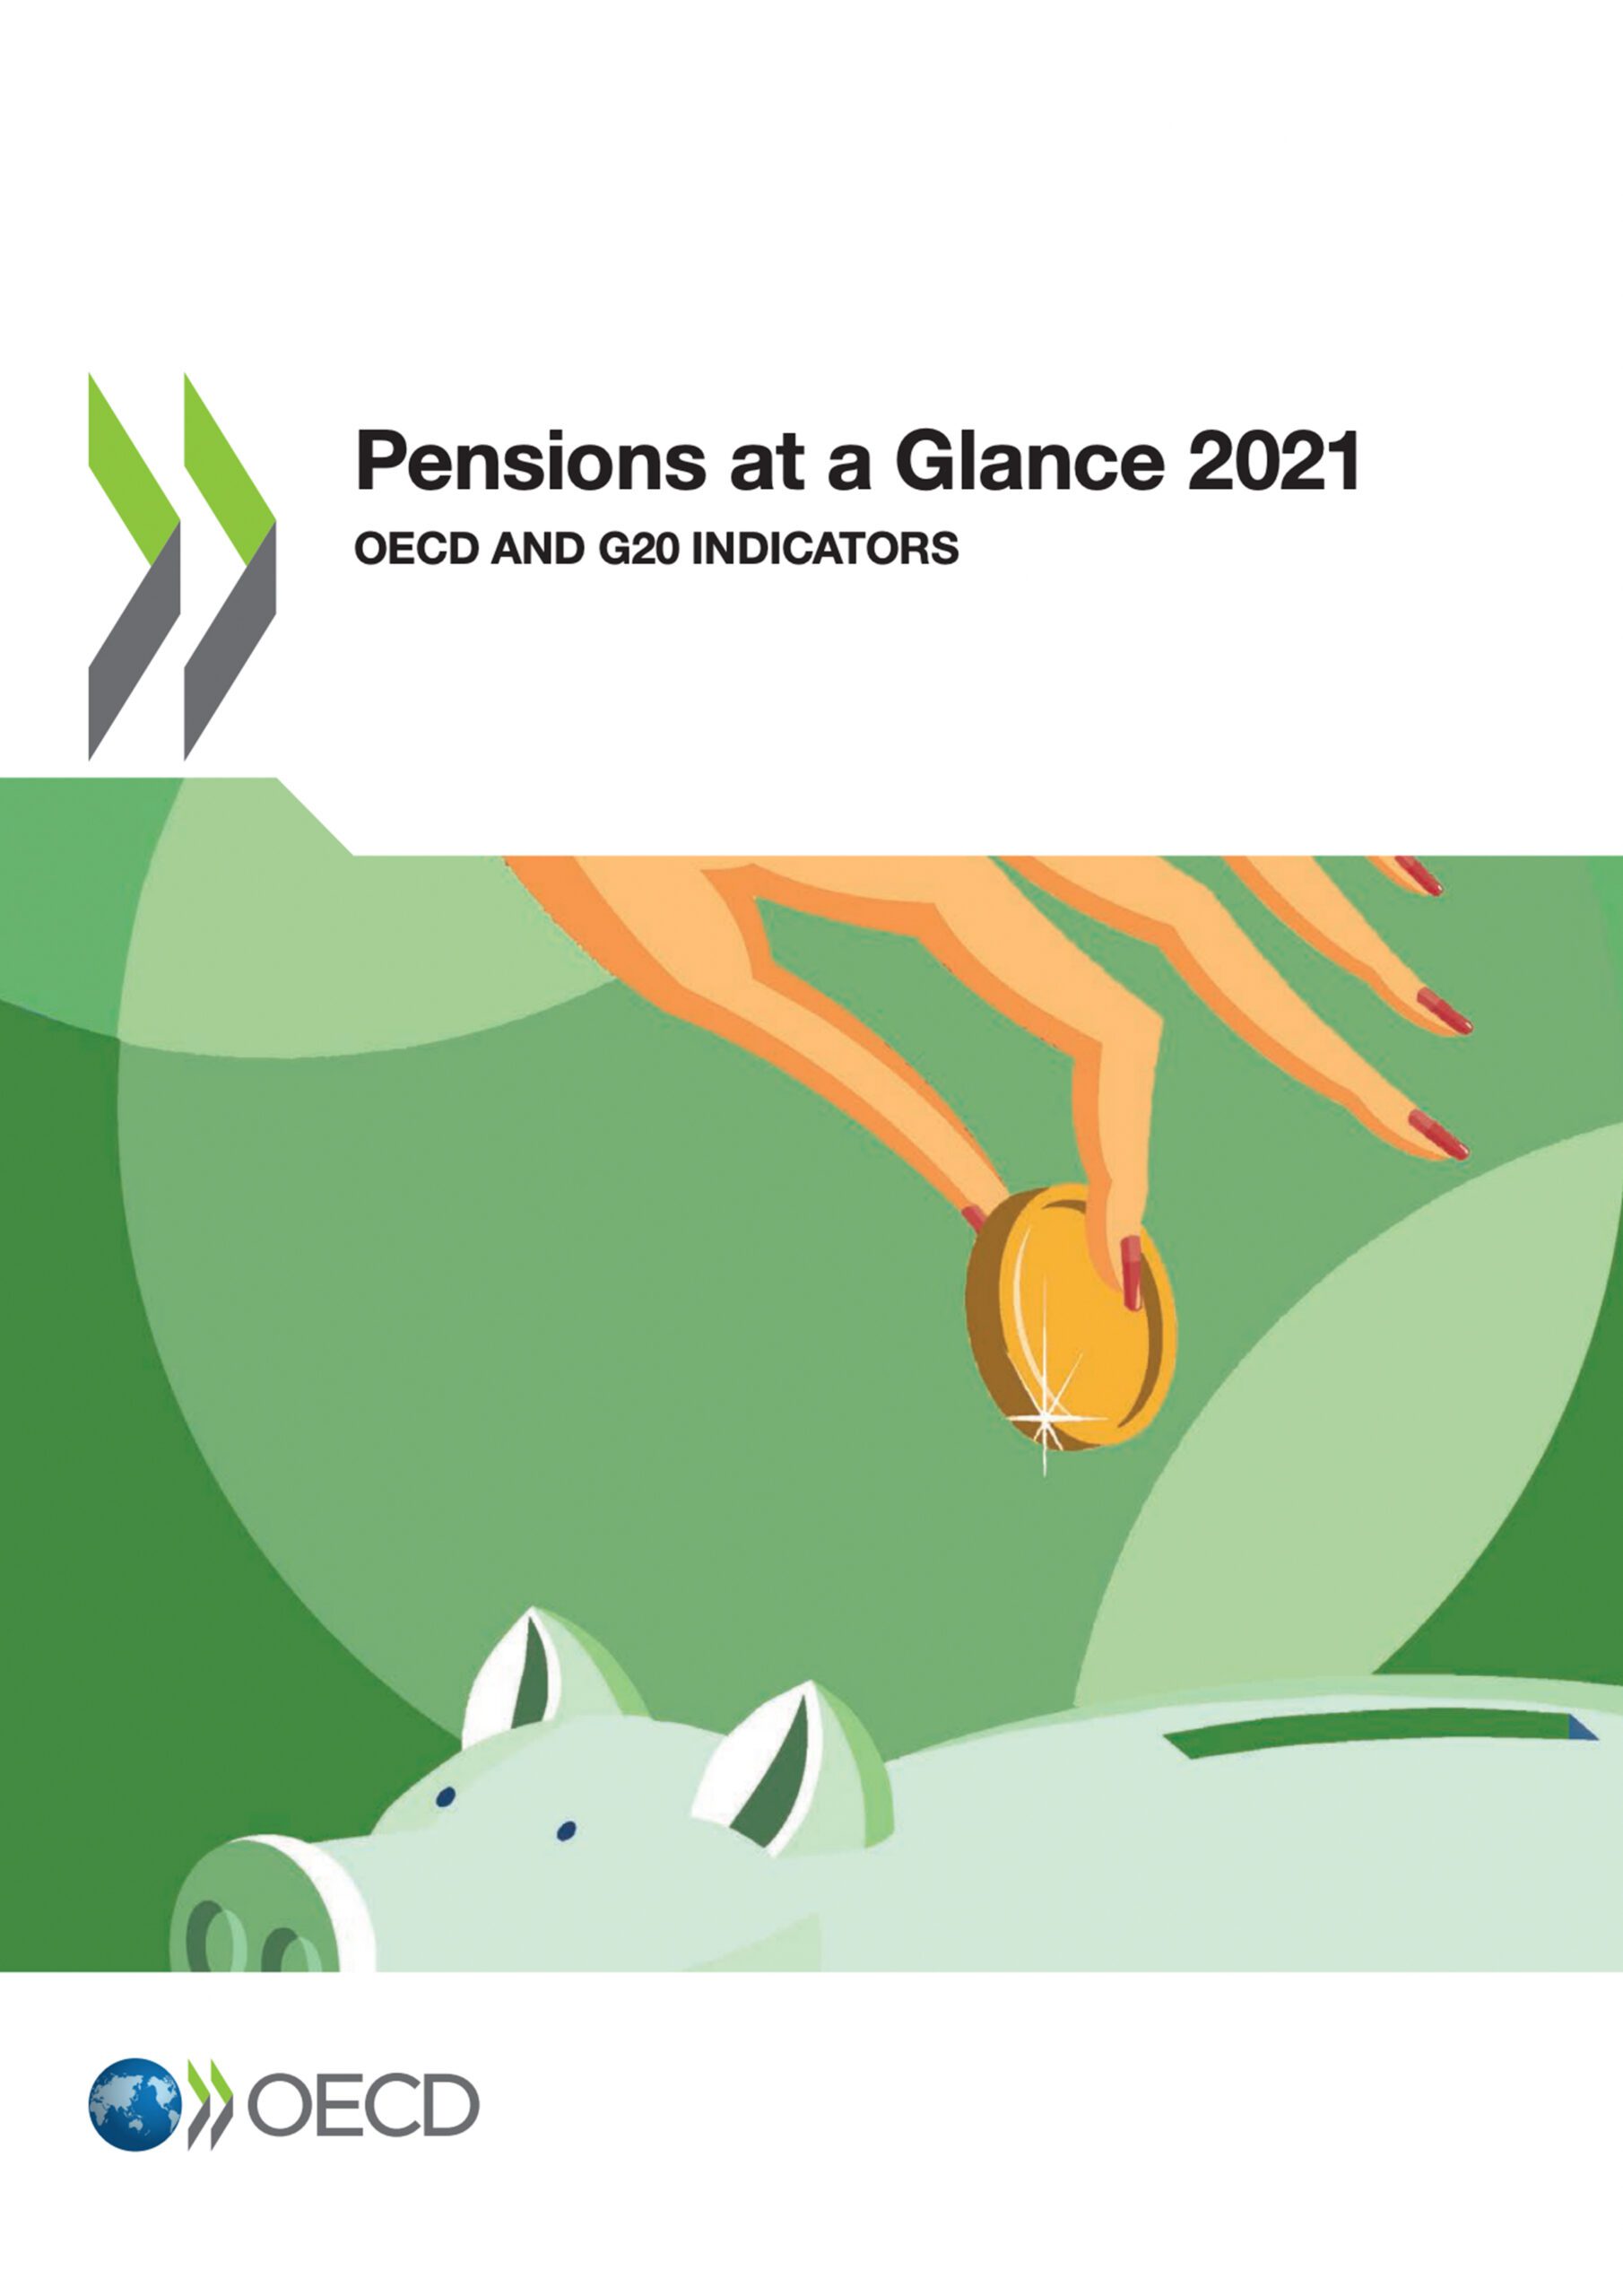 Pensions at a Glance 2021